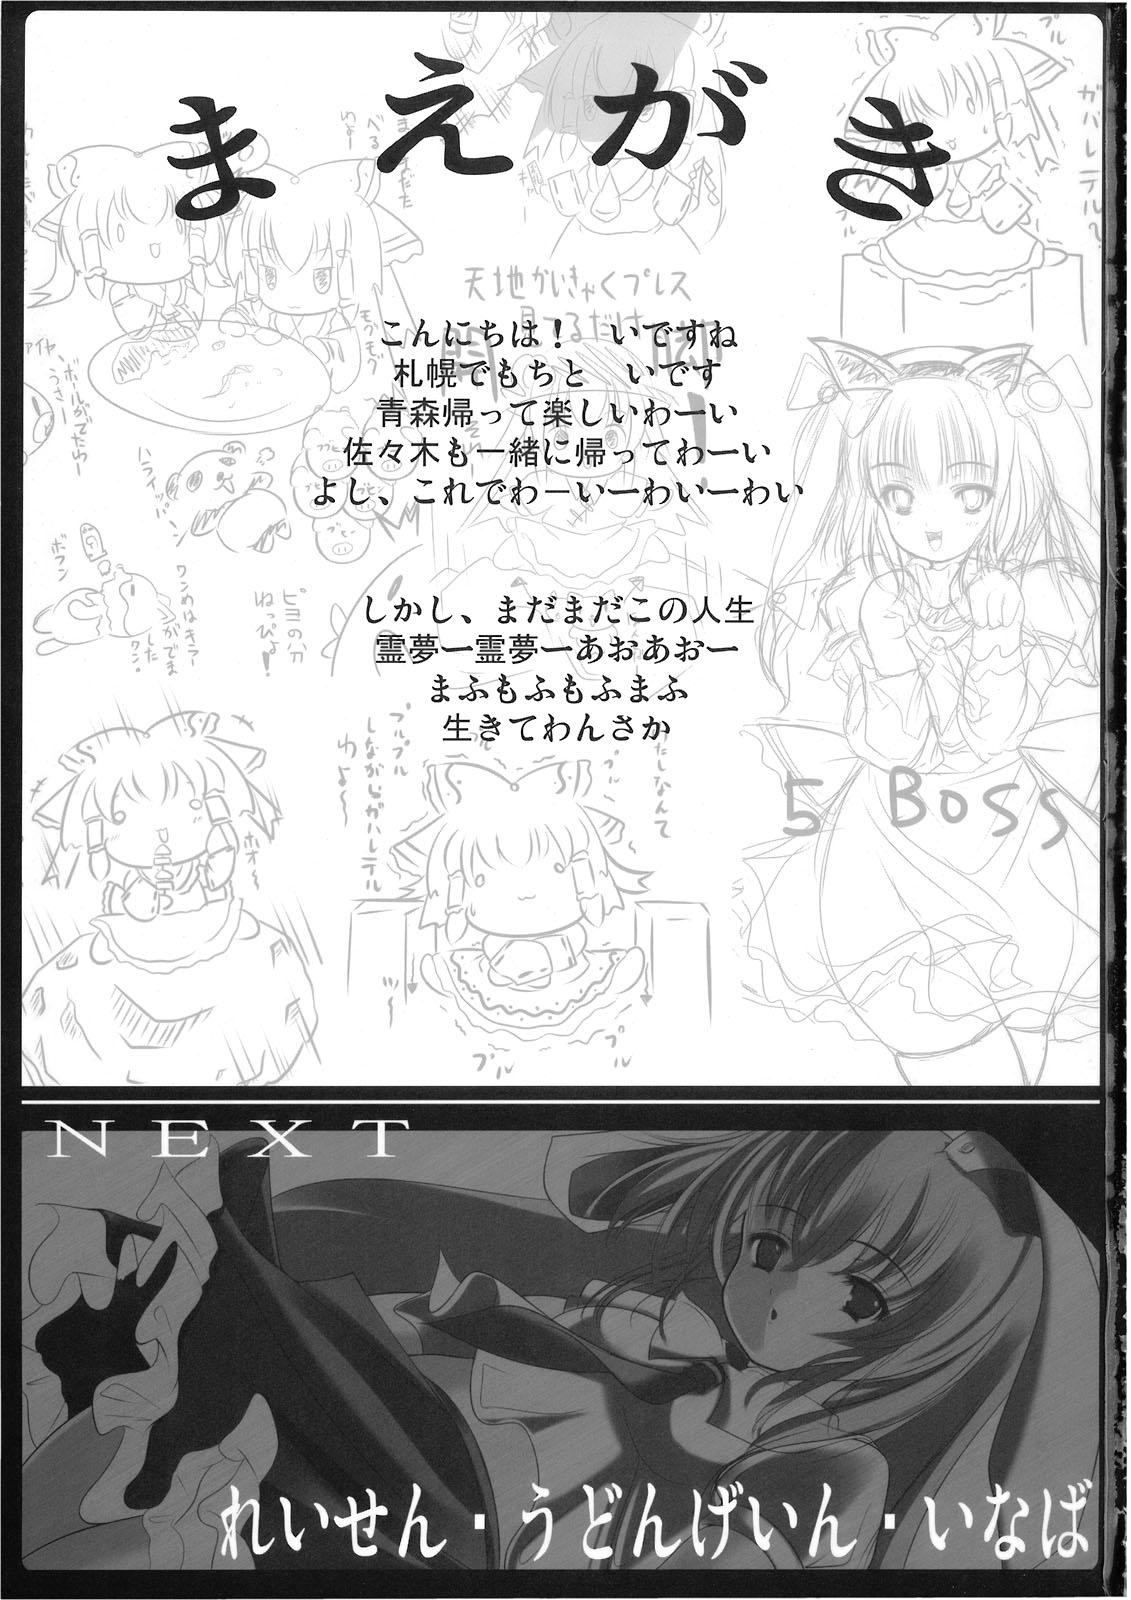 Tied 幻想郷 爆!! - Touhou project Two - Page 3